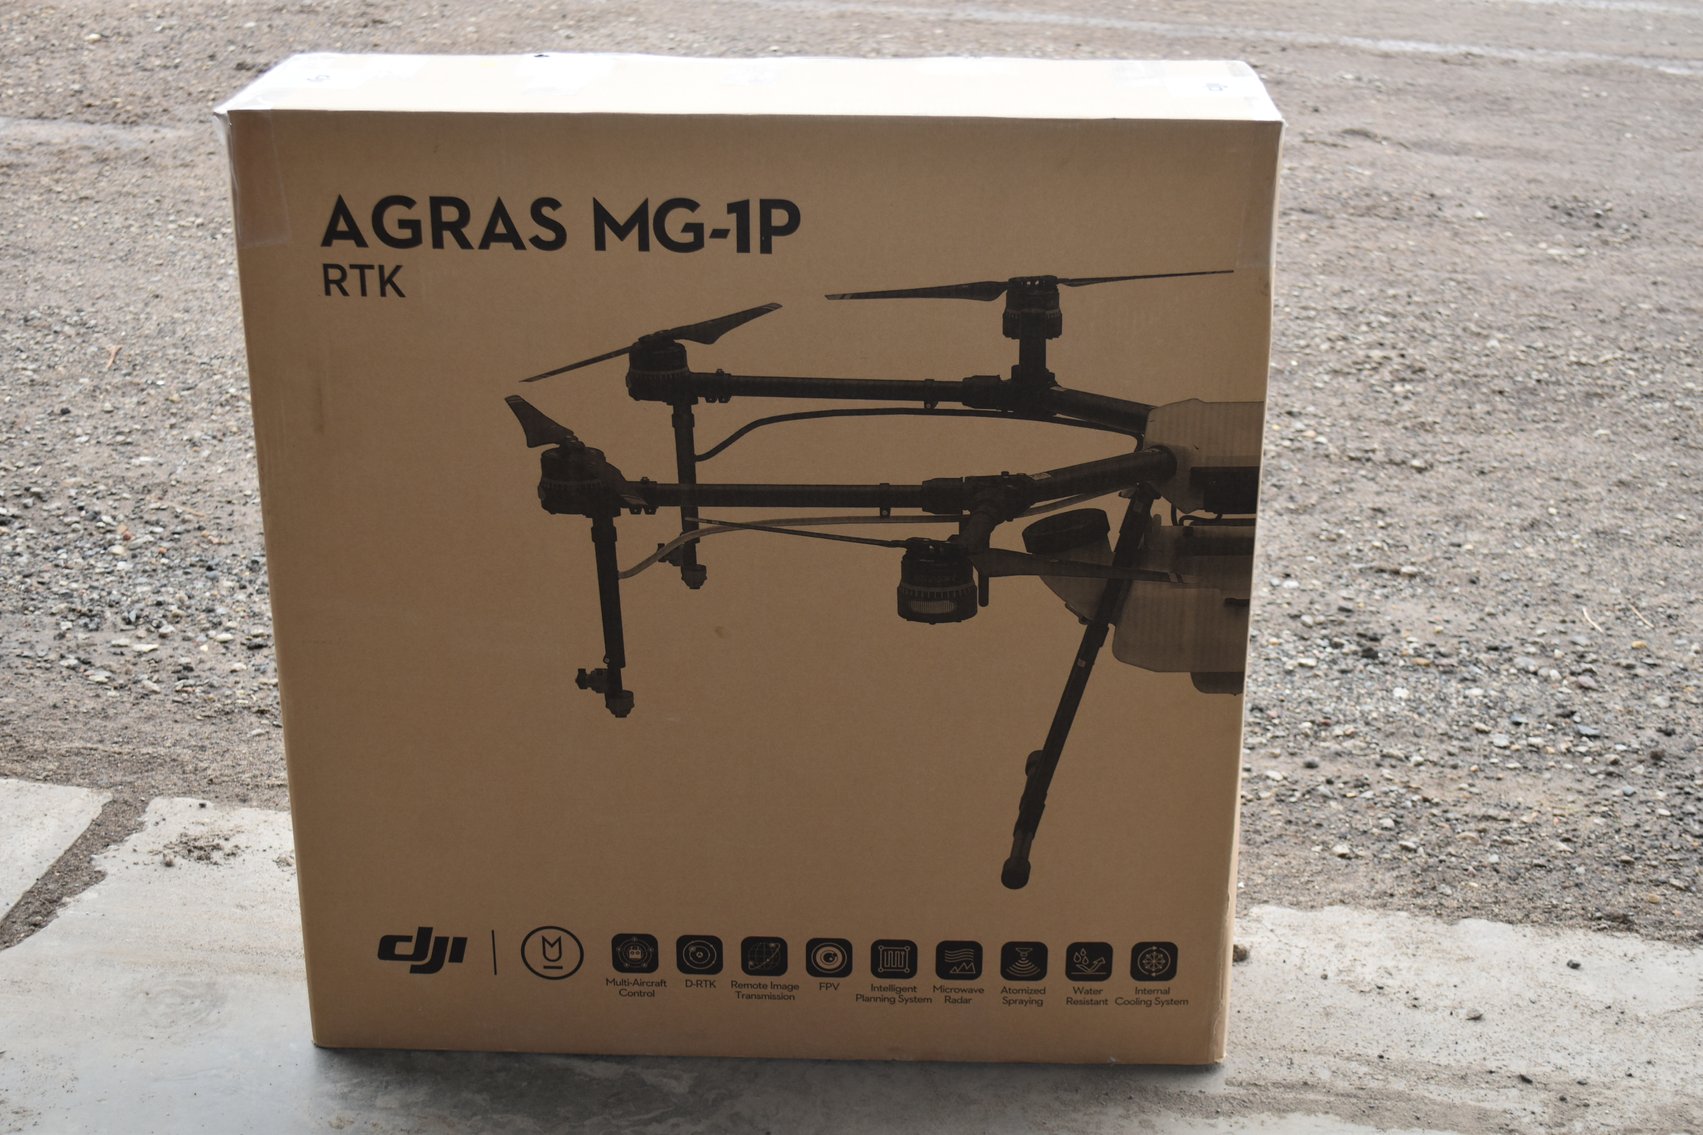 Agras MG-1P RTK Spraying System Drone With Accessories